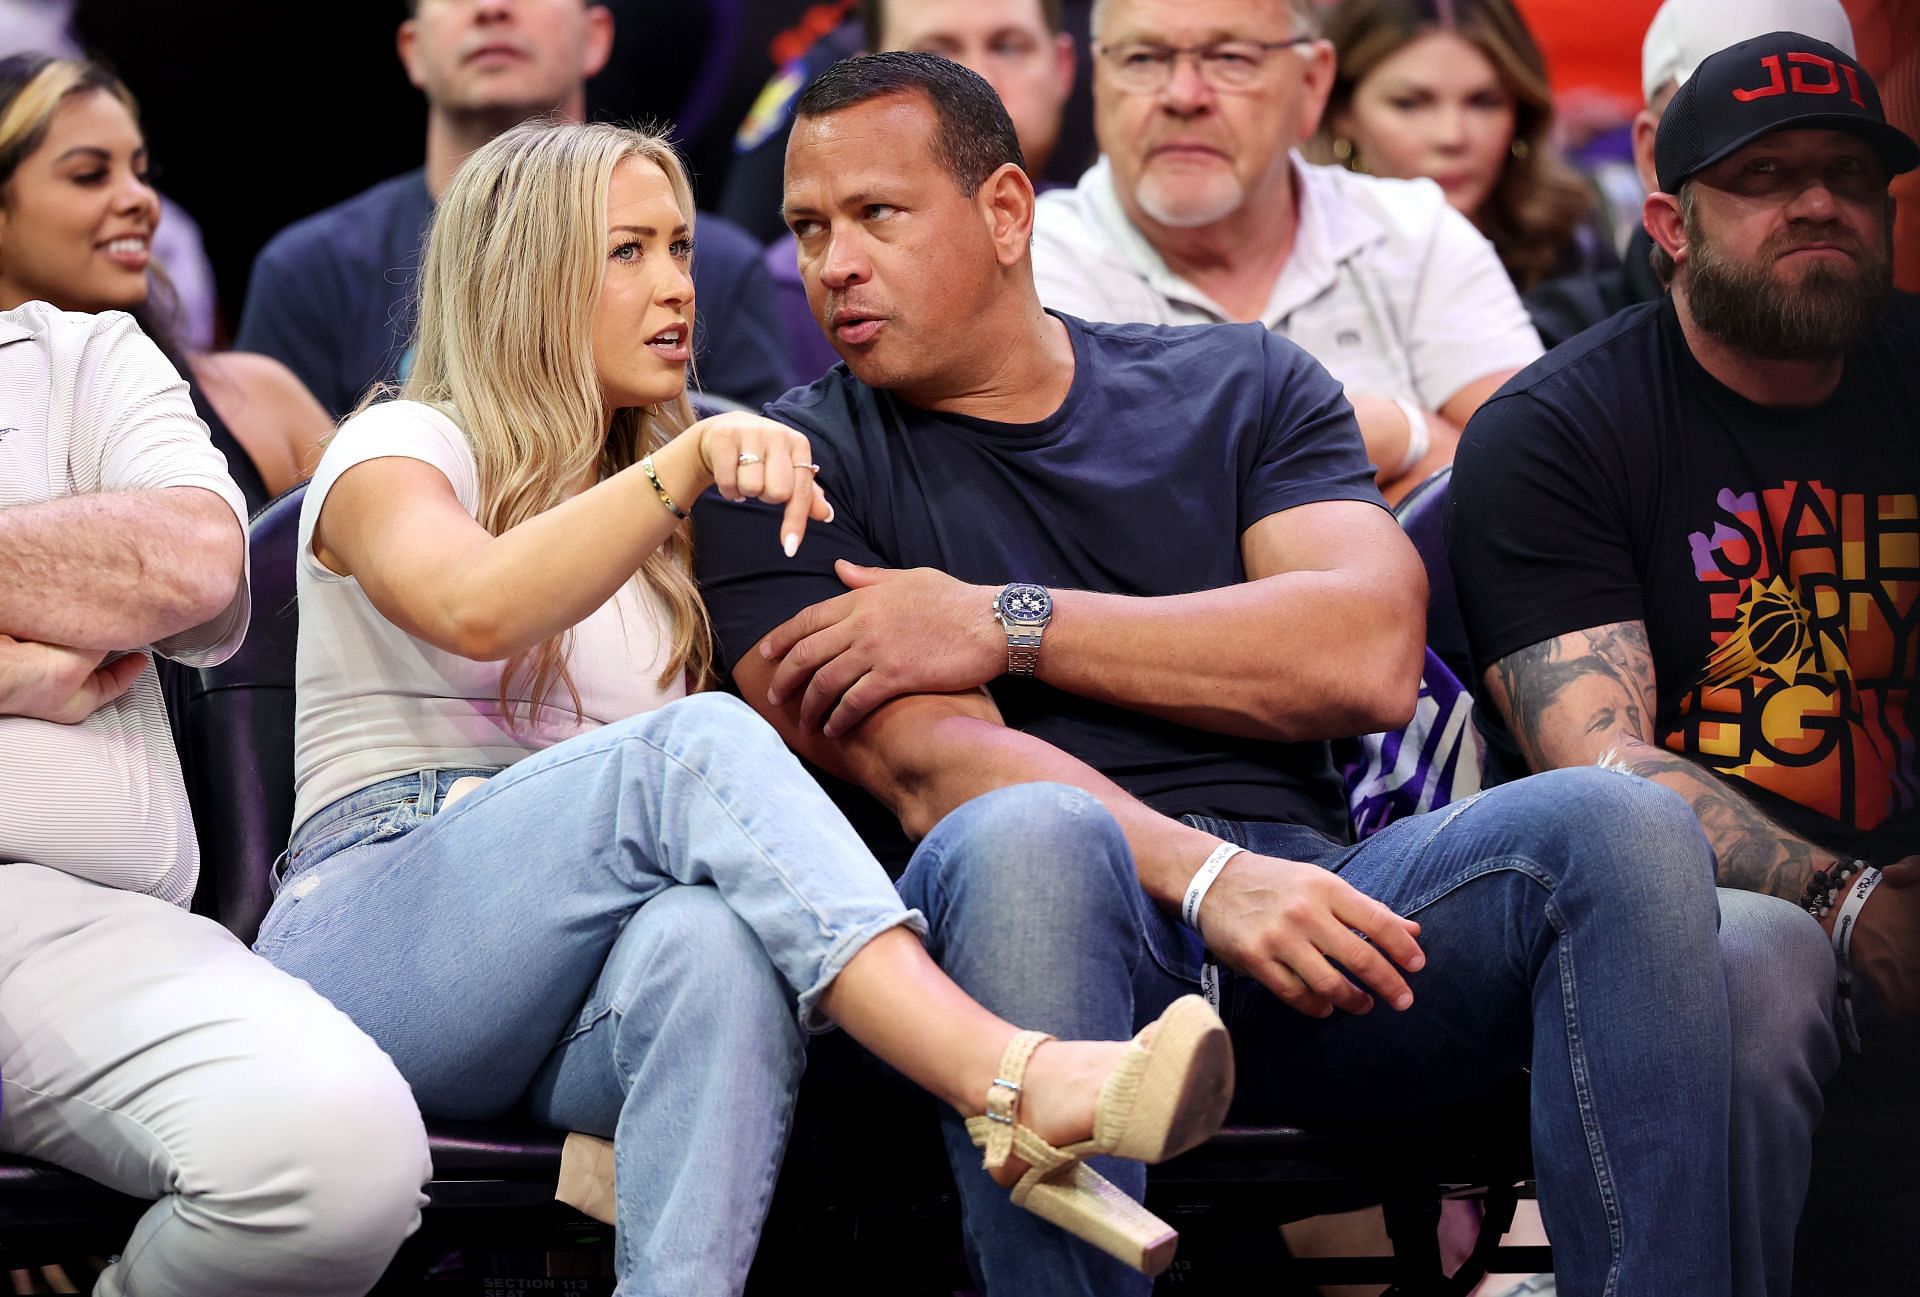 Alex Rodriguez and Kathryne Padgett at Game 7 of the 2022 NBA Playoffs Western Conference Semifinals between the Dallas Mavericks and the Phoenix Suns